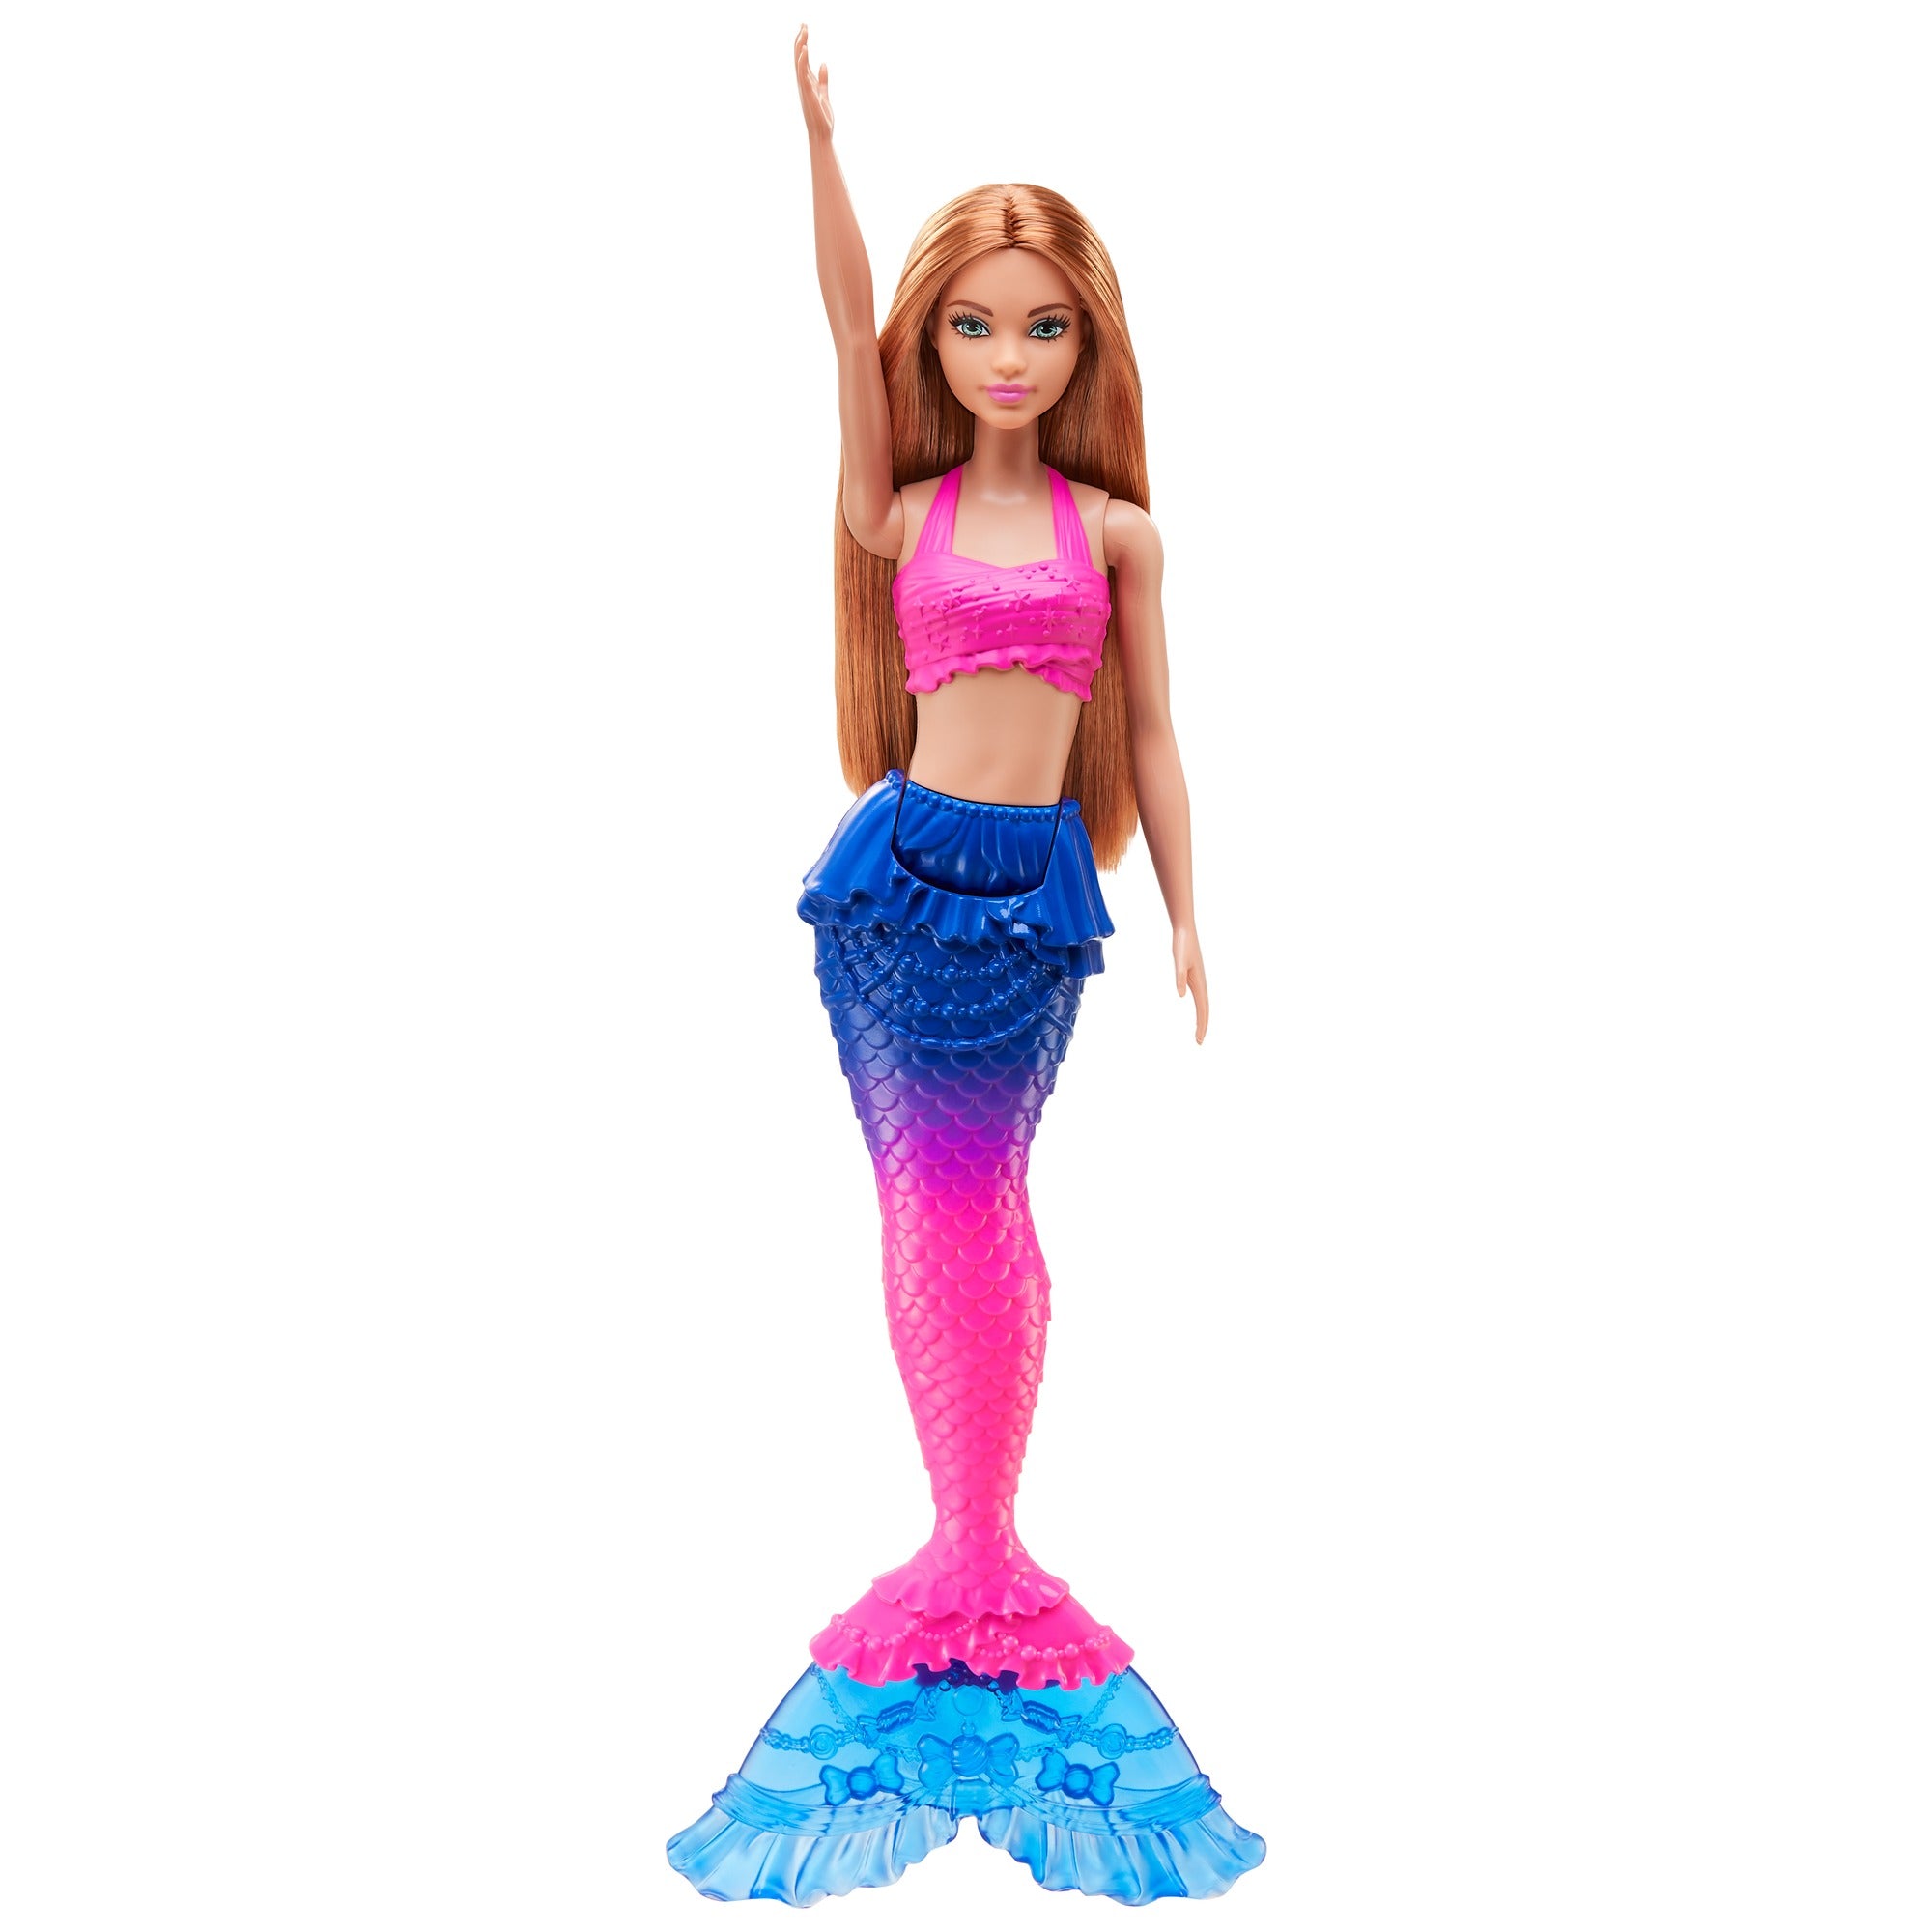 Barbie Brunette Mermaid Set Dolls with Colorful Clothes & Accessories for Kids Ages 3+